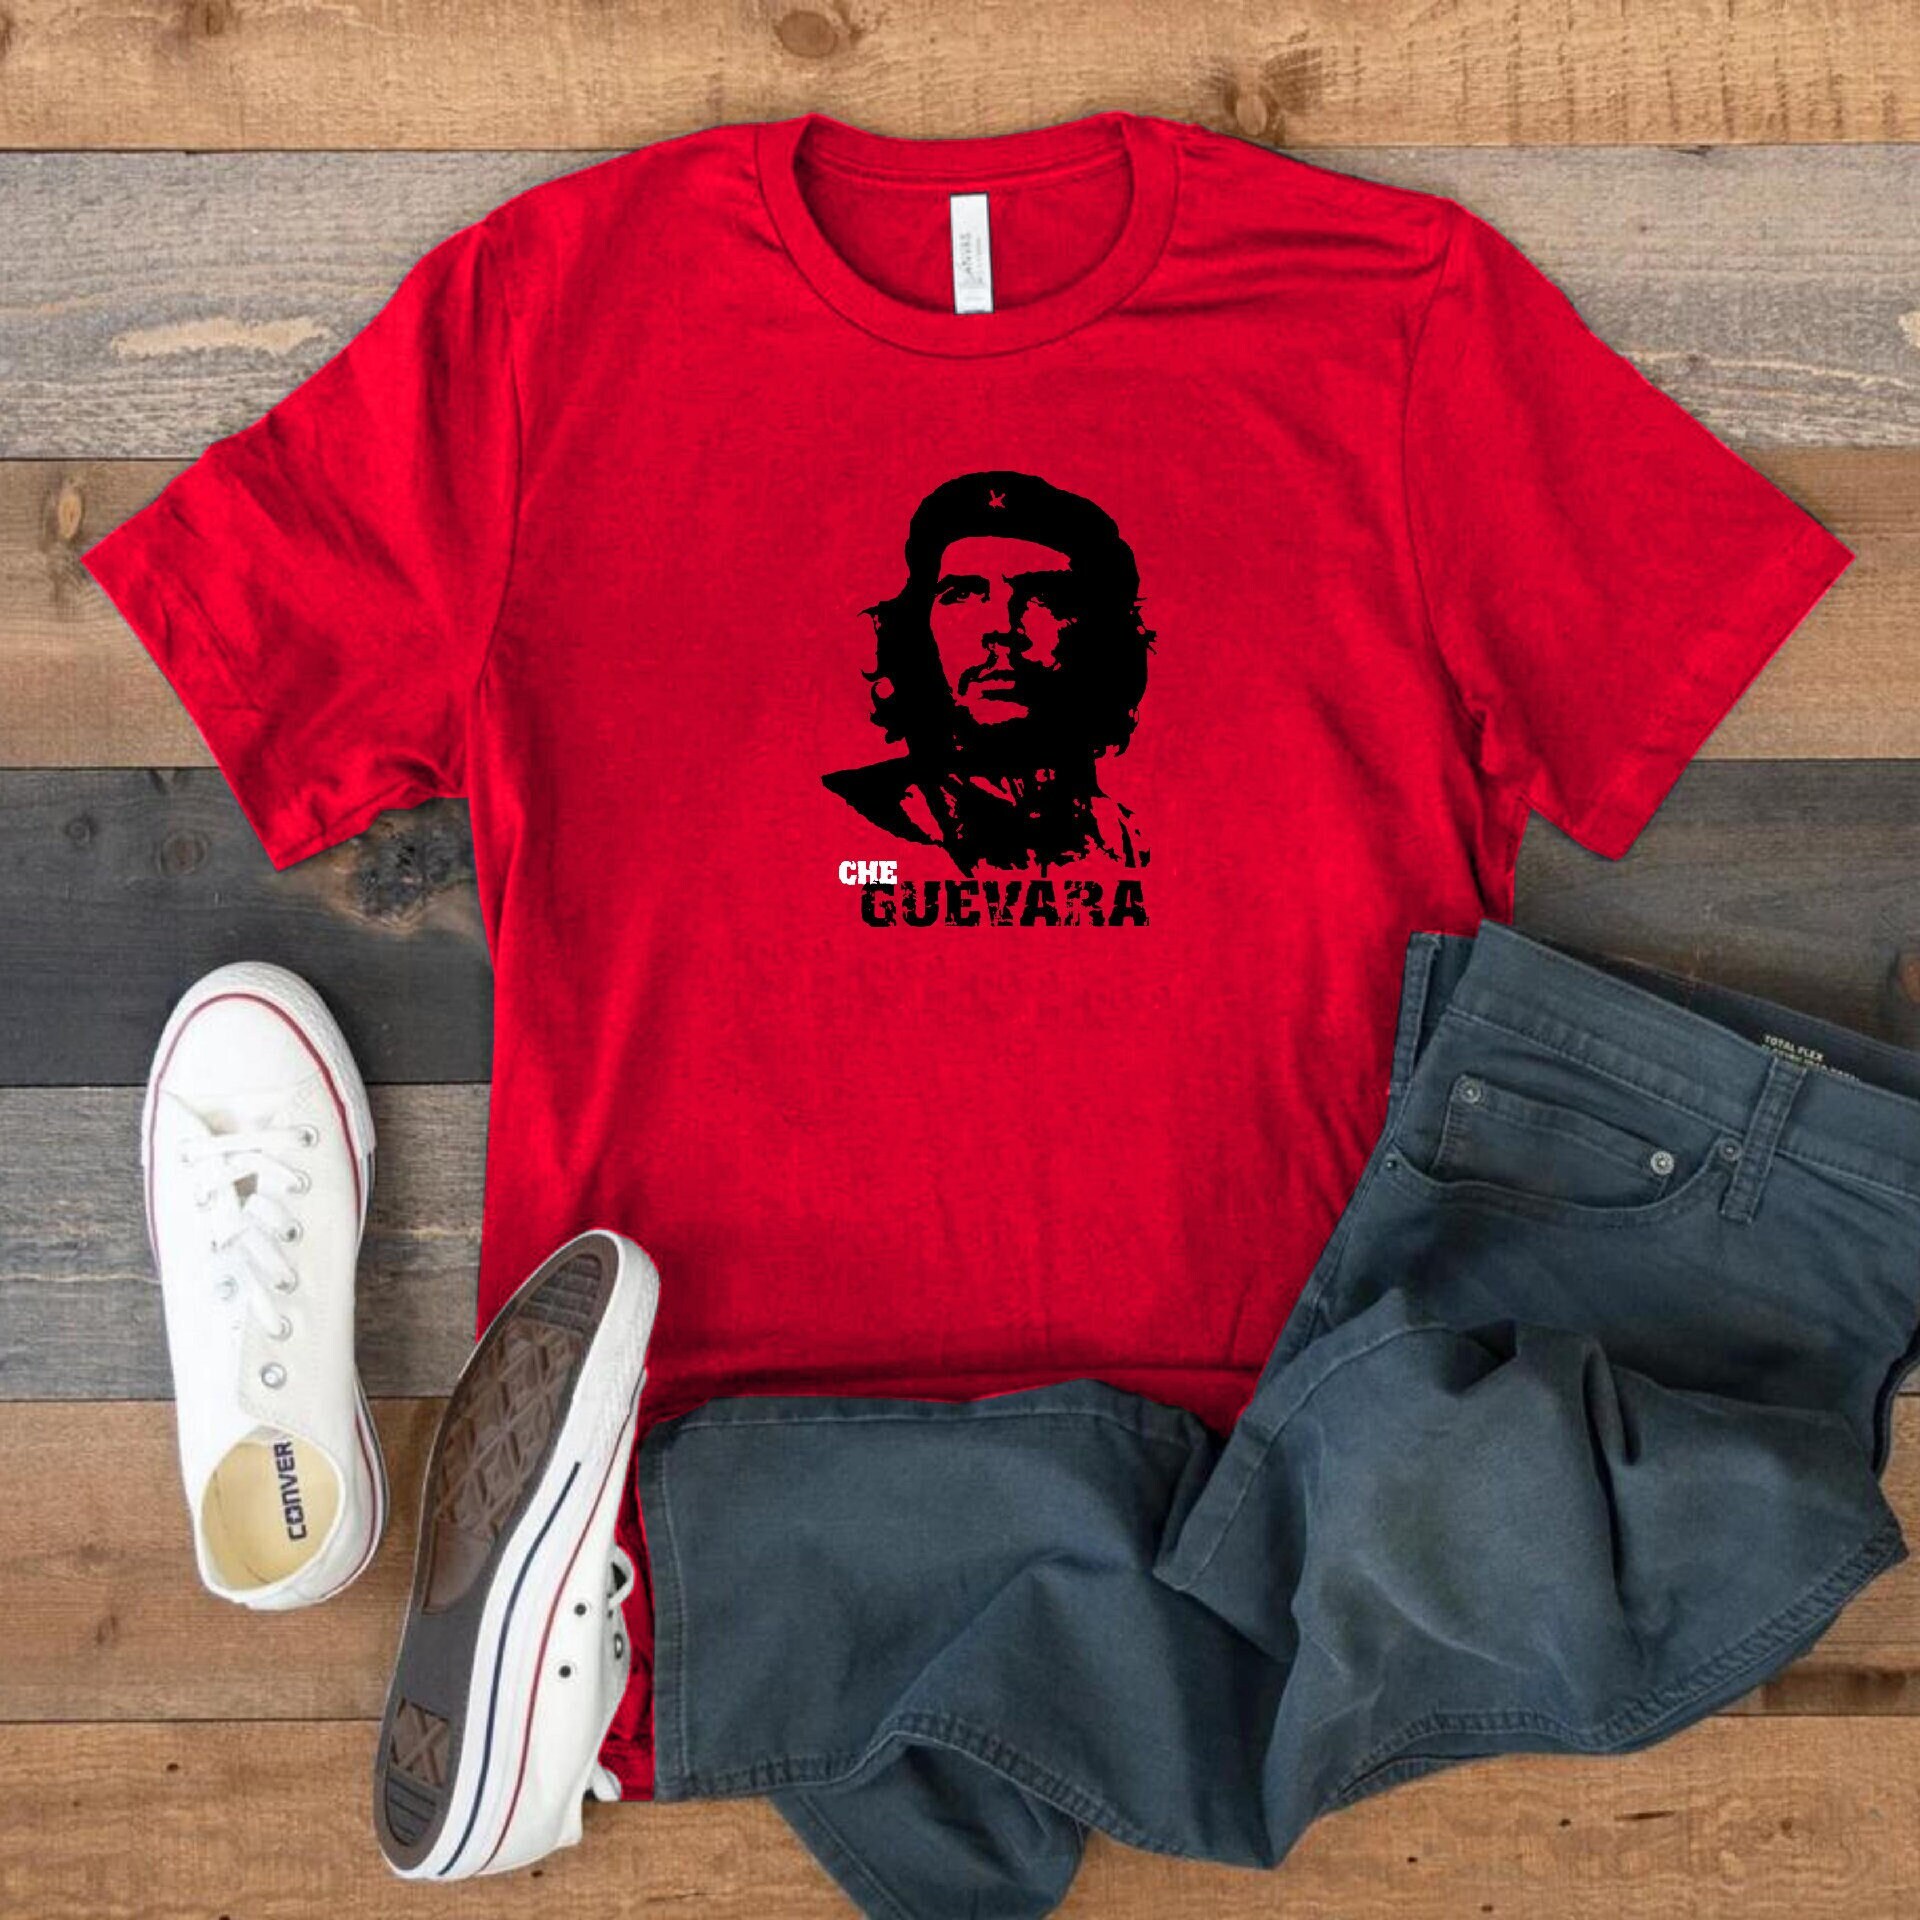 Political AntiSocialist Che Guevara Quote Funny' Men's T-Shirt